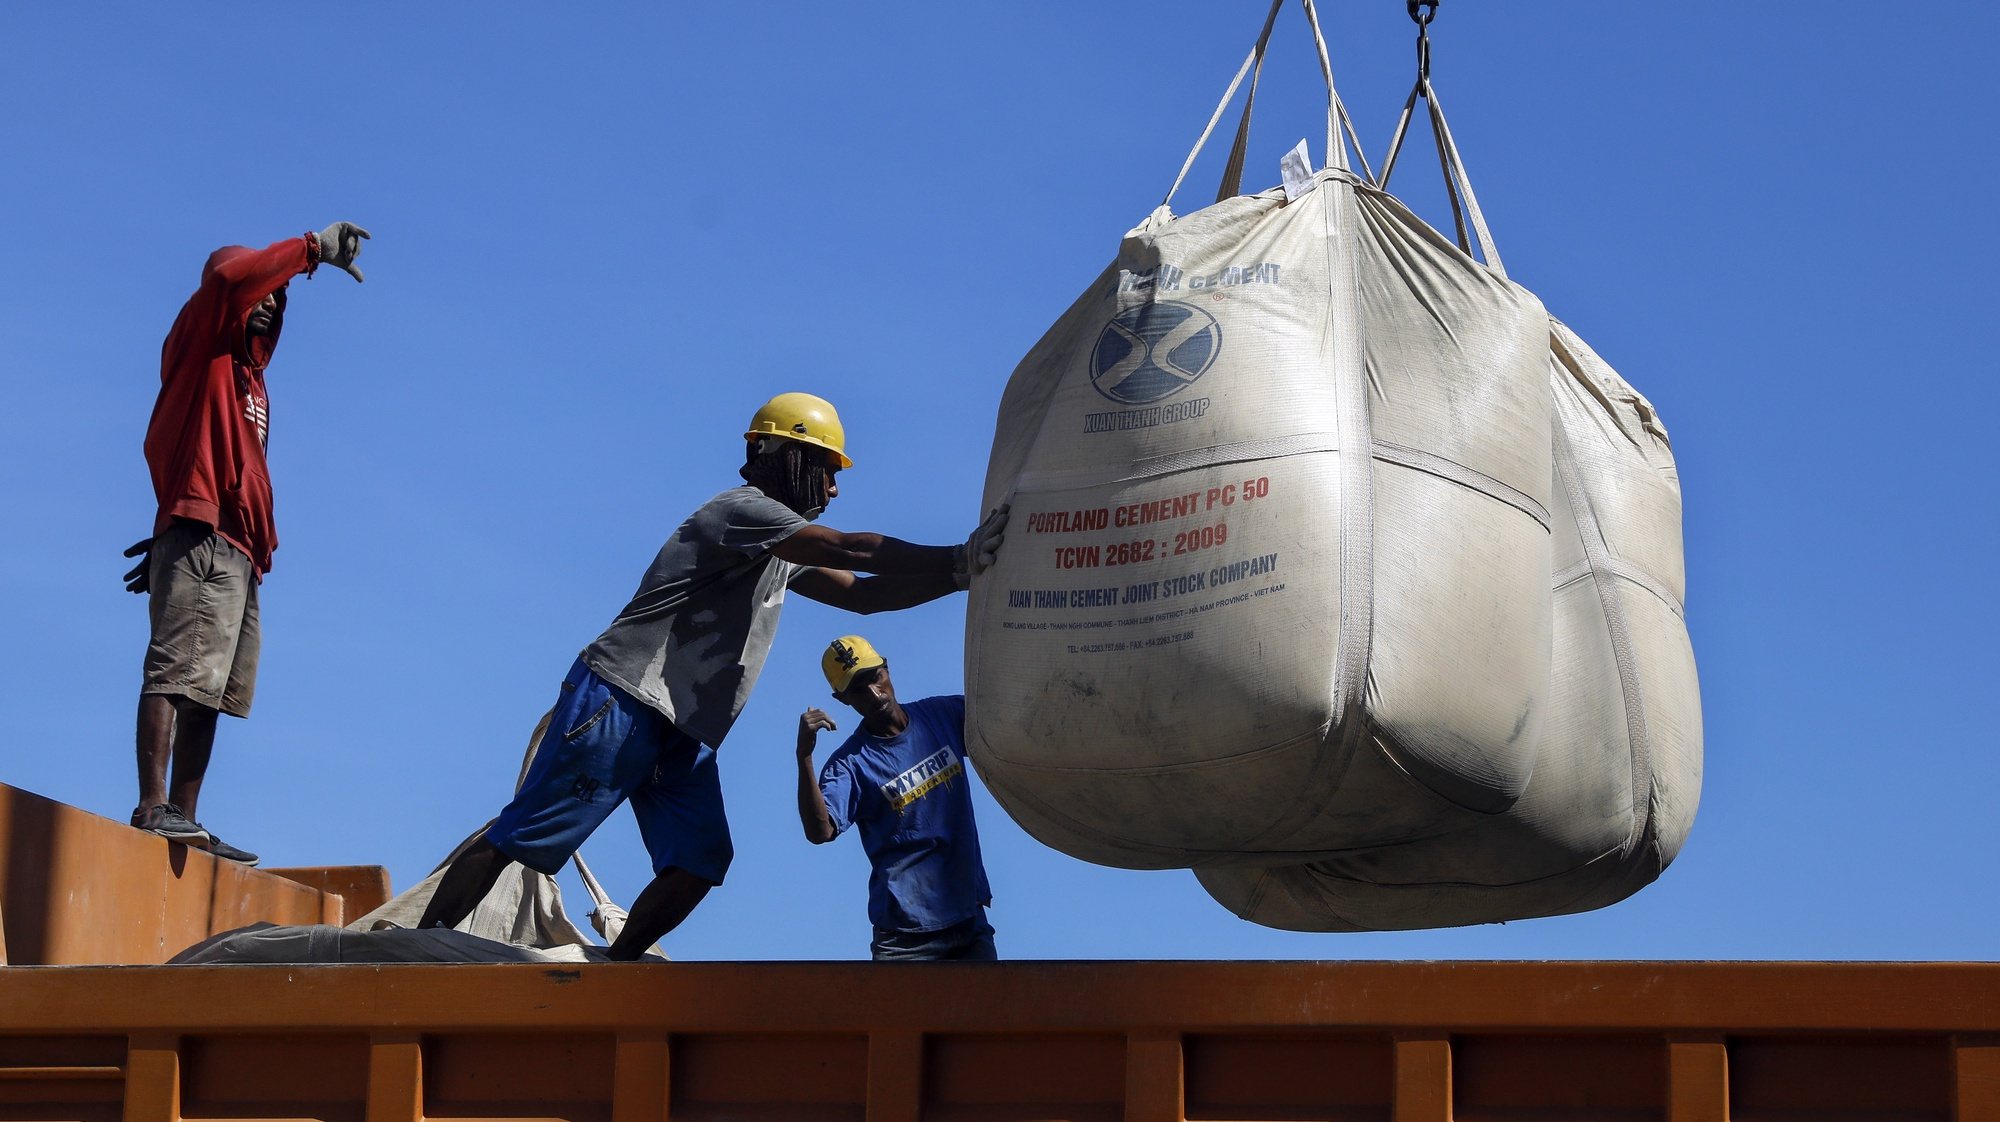 epa10105179 Labourers unload sacks of cement from a cargo ship onto a truck at a port in Dili, East Timor, also known as Timor Leste, 04 August 2022. According to Asian Development Bank (ADP) Timor Leste&#039;s gross domestic product (GDP) expected to grow 2.5 percent in 2022 and 3.1 percent in 2023.  EPA/ANTONIO DASIPARU